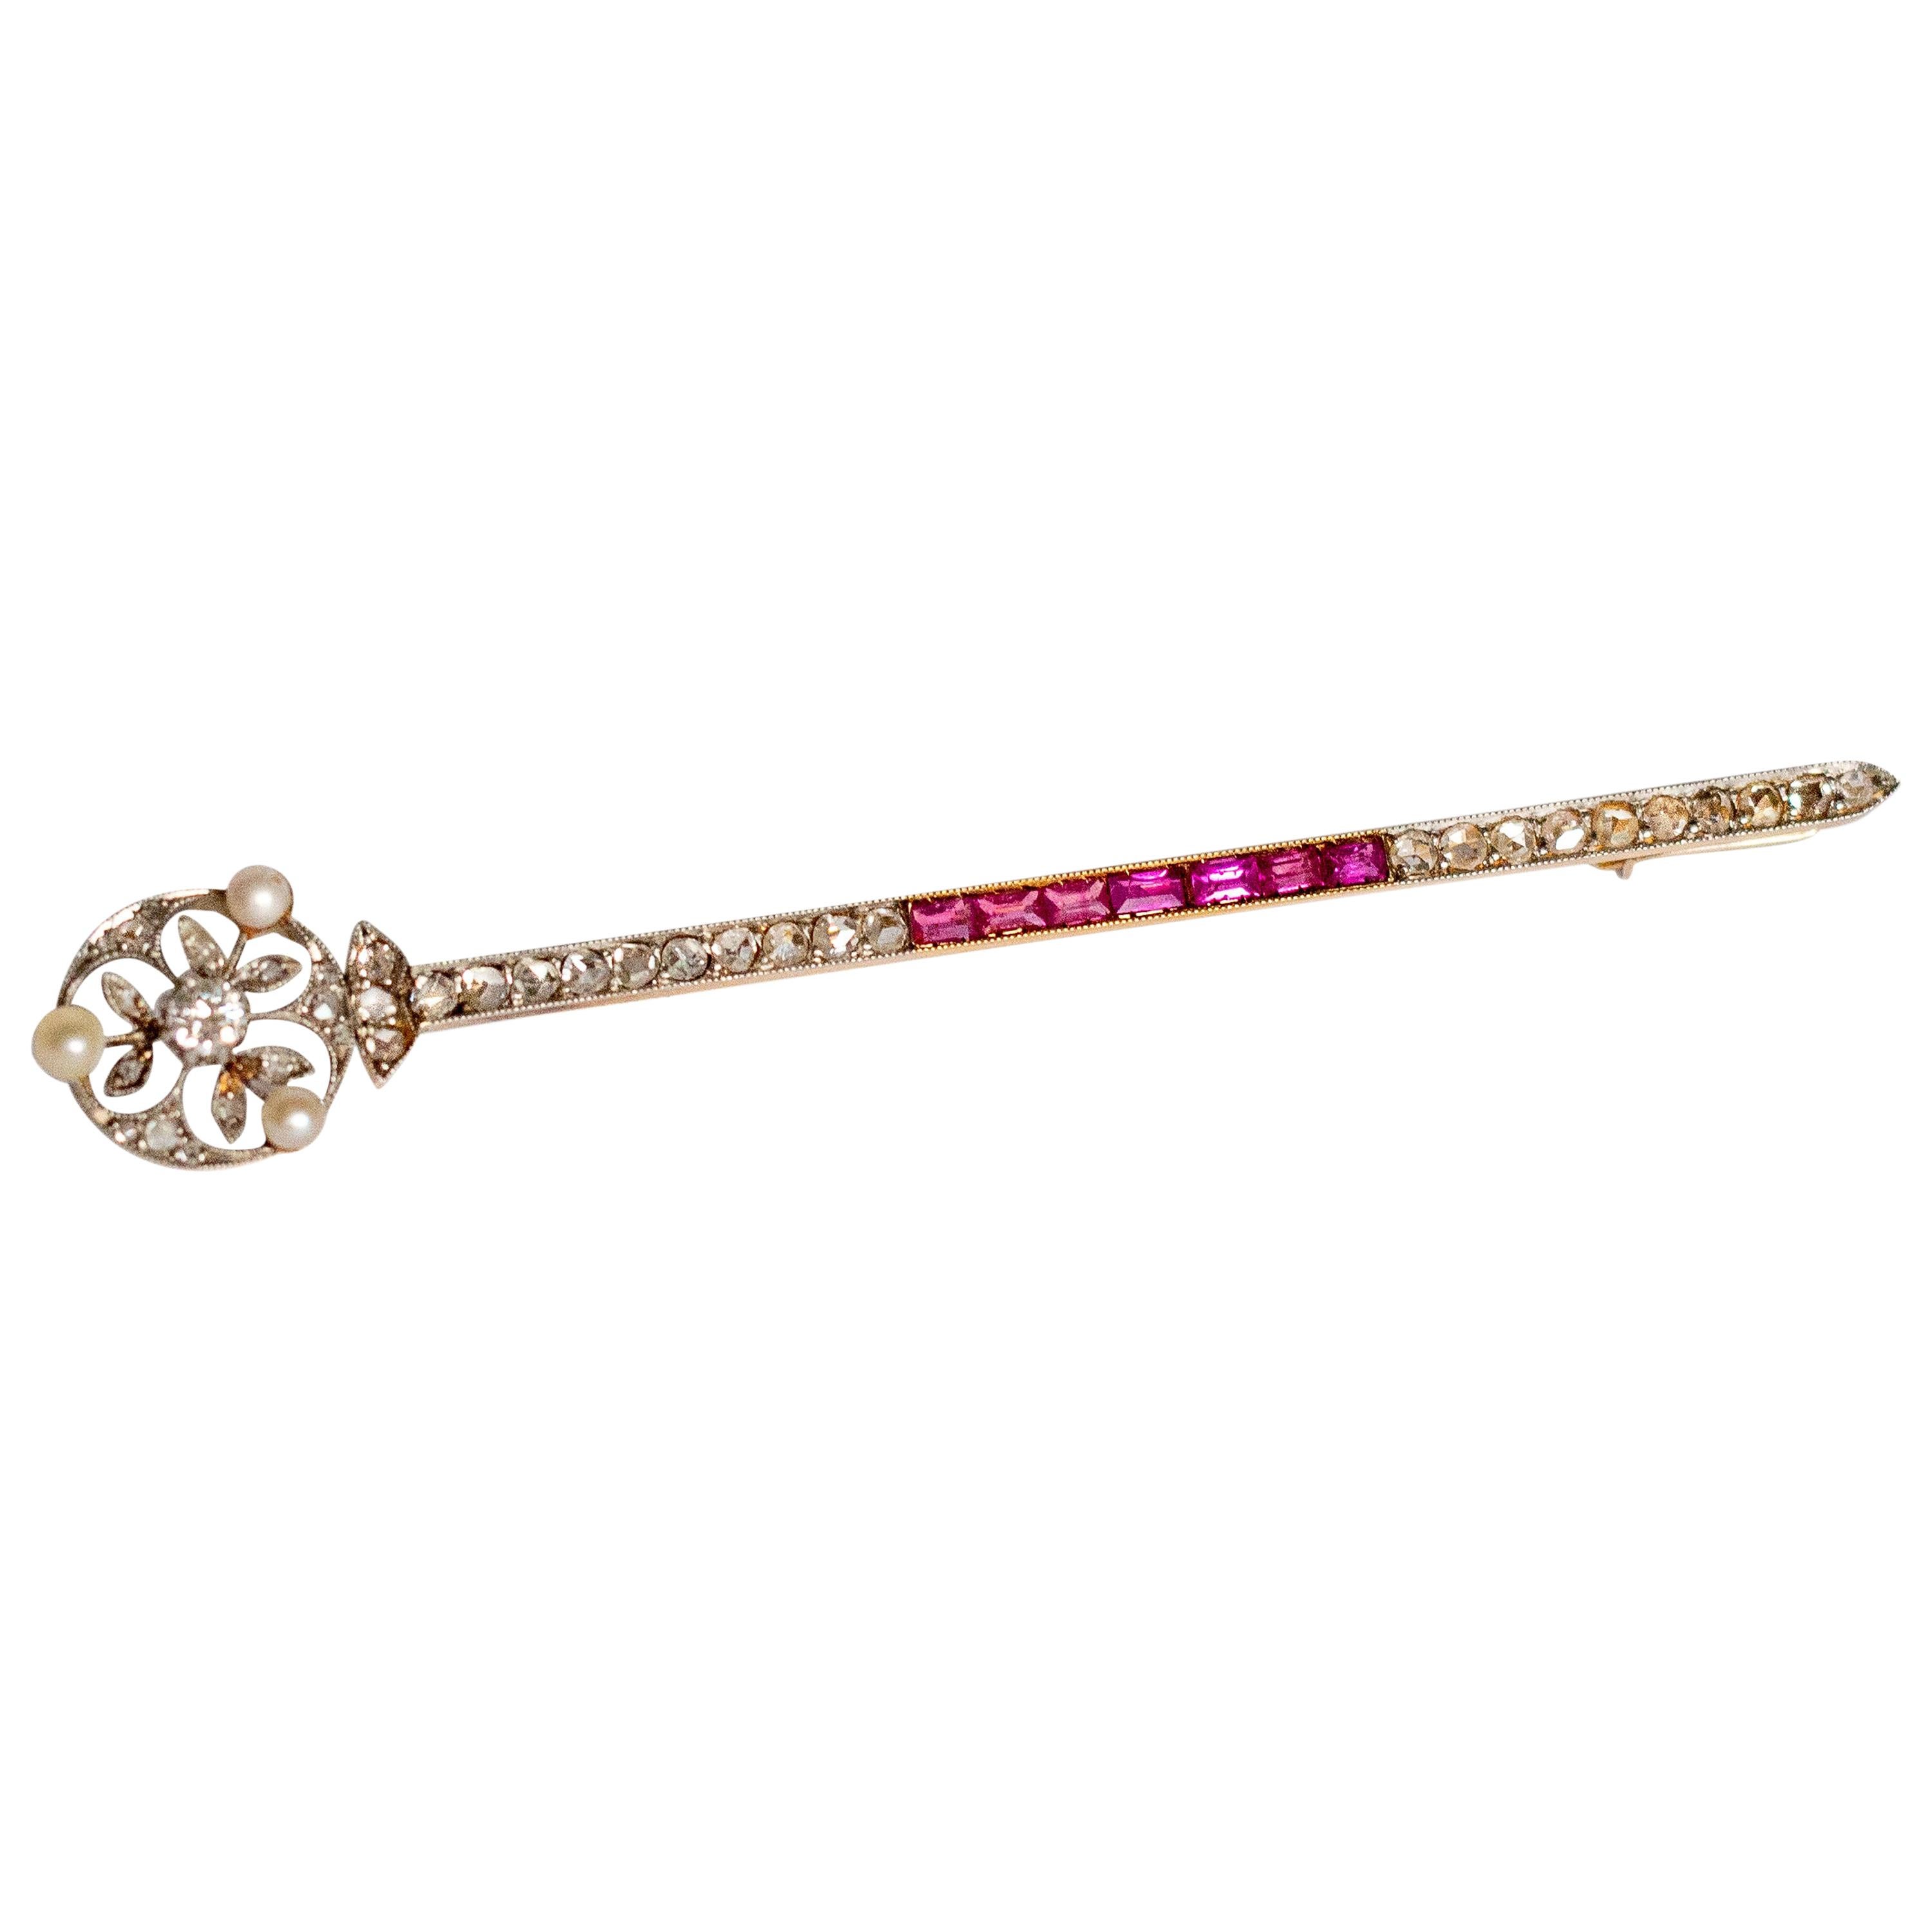 Victorian Ruby, Pearl and Diamond Sword Brooch